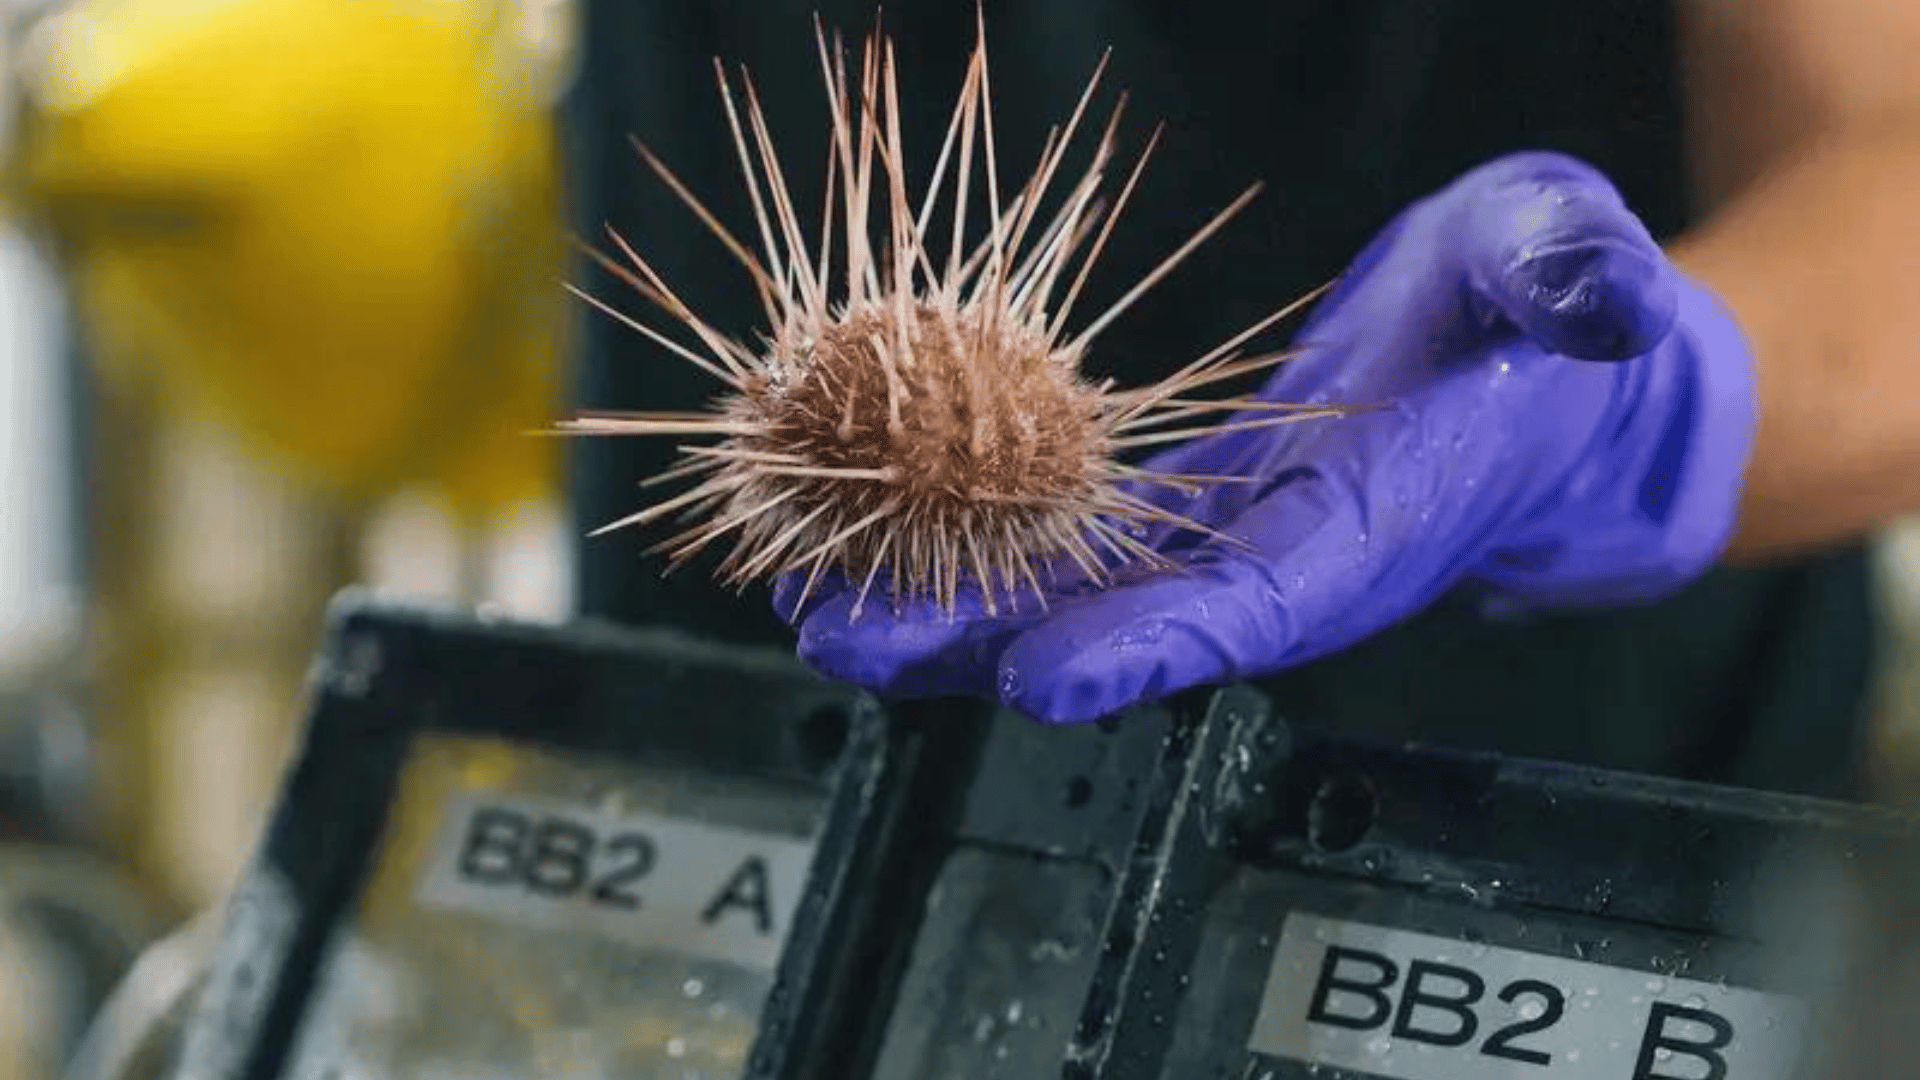 An urchin retrieved as a sample by ROV SuBastian is handled by a researcher CREDIT: Alex Ingle:Schmidt Ocean Institute